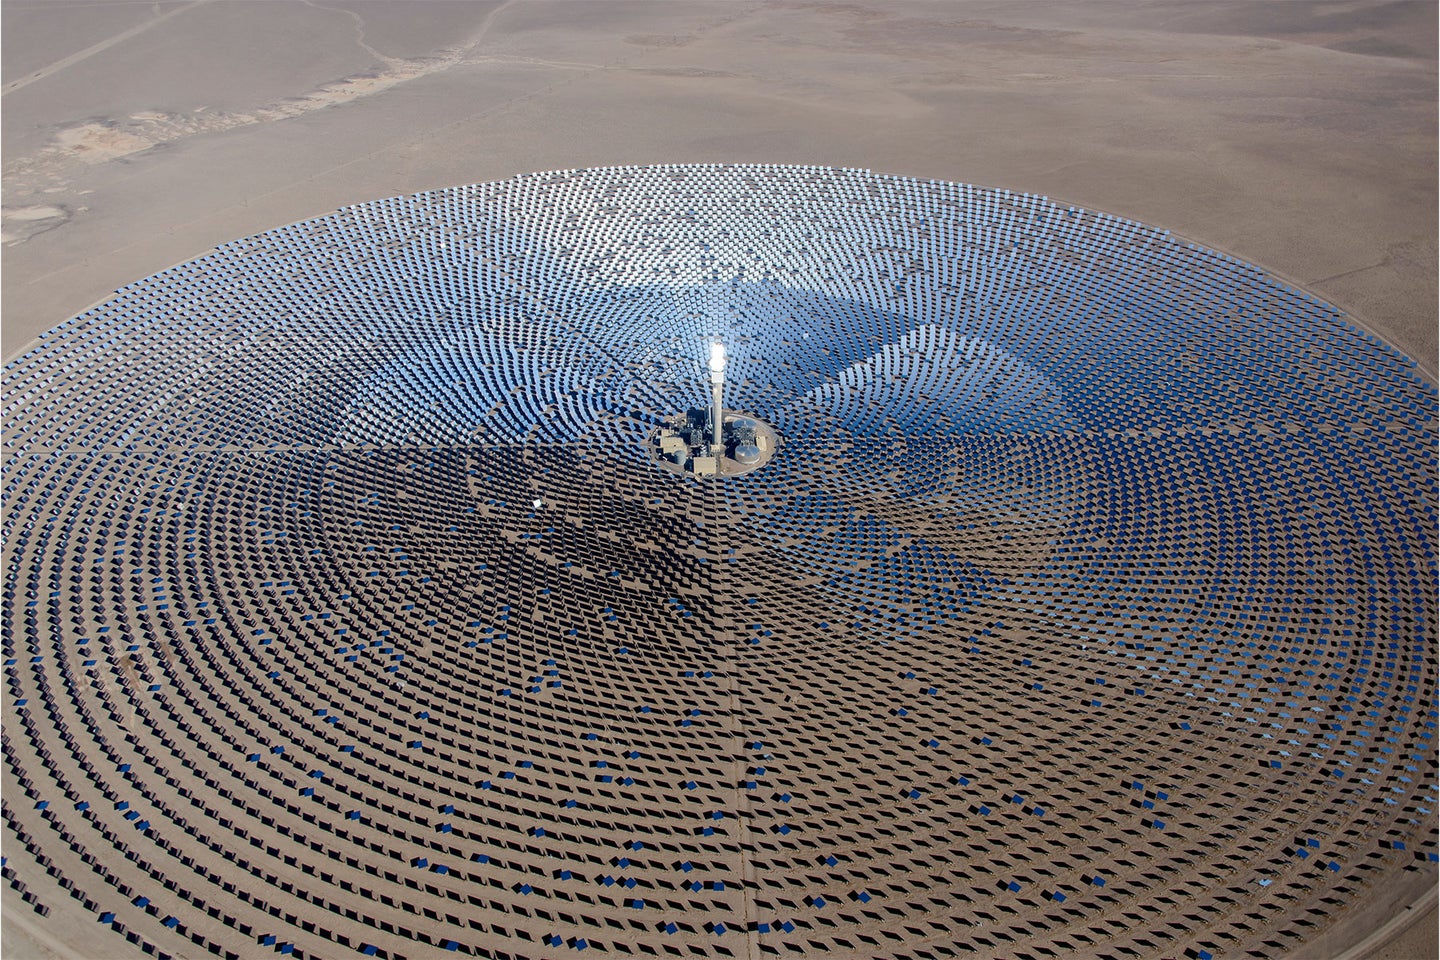 An aerial view of solar panels on public land in Nevada.